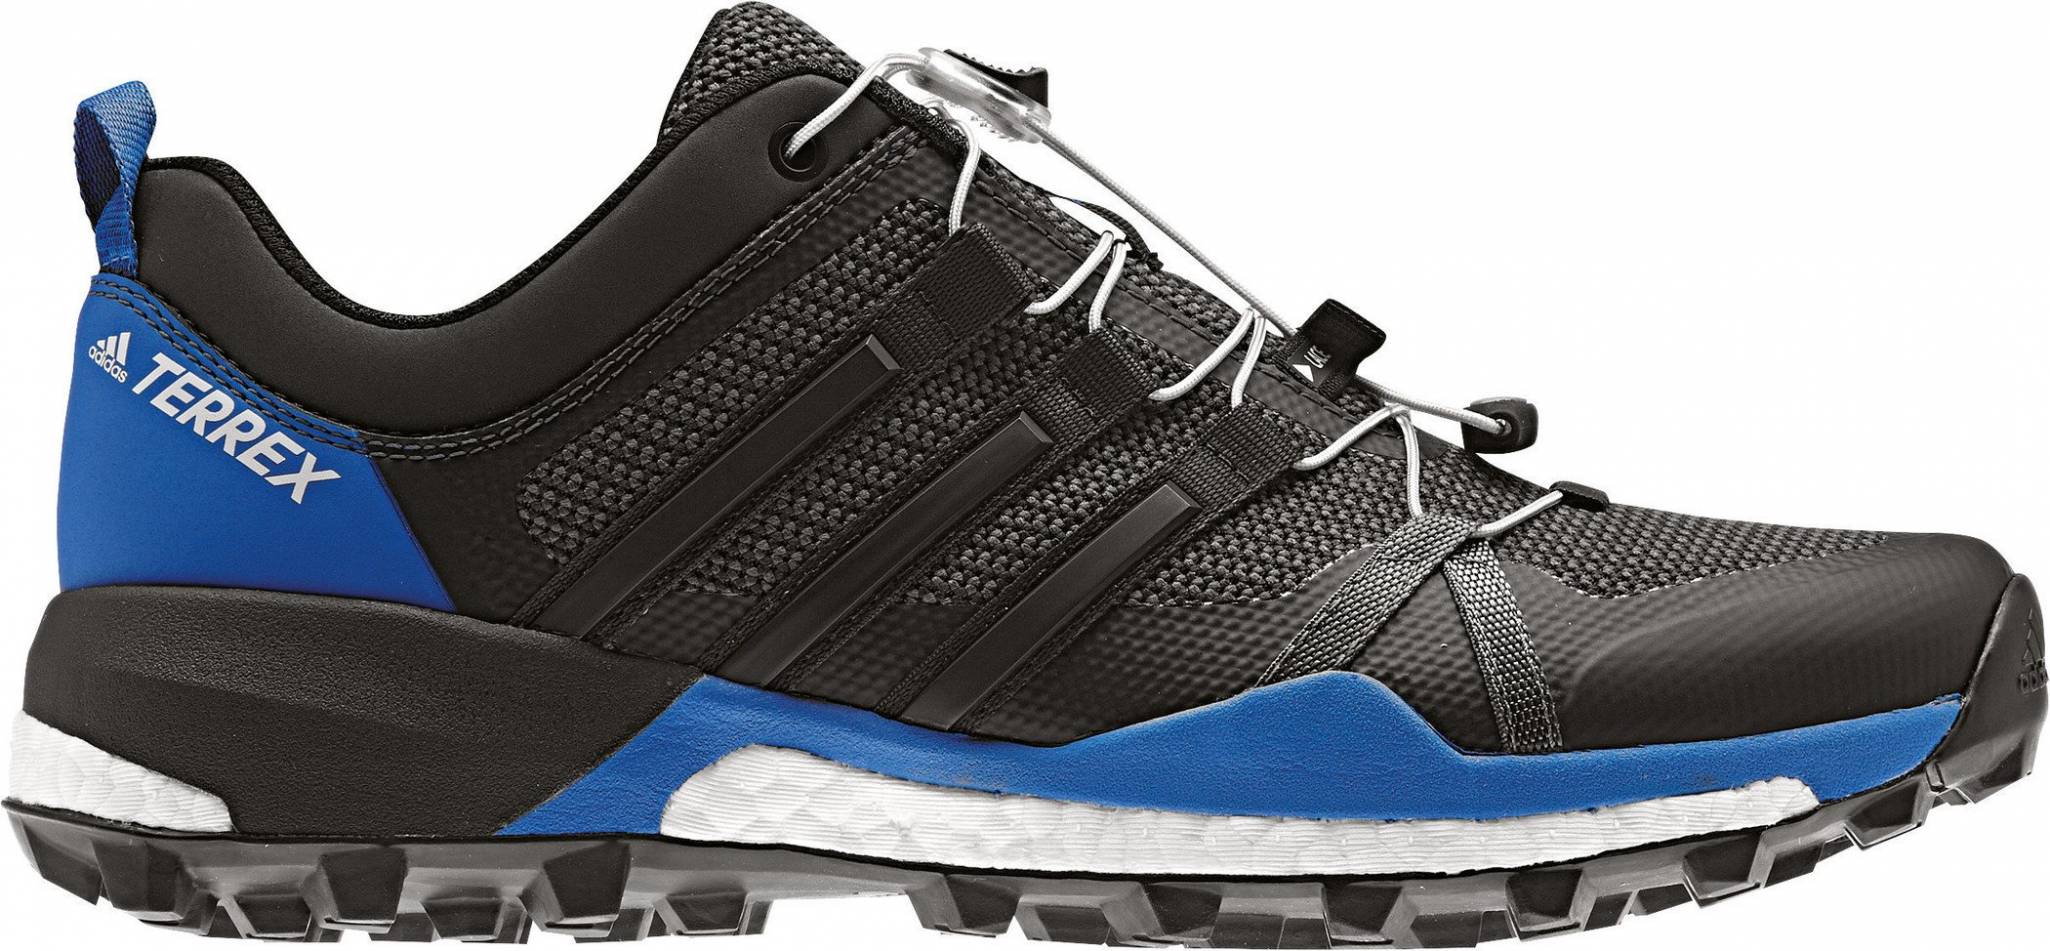 adidas skychaser gtx review